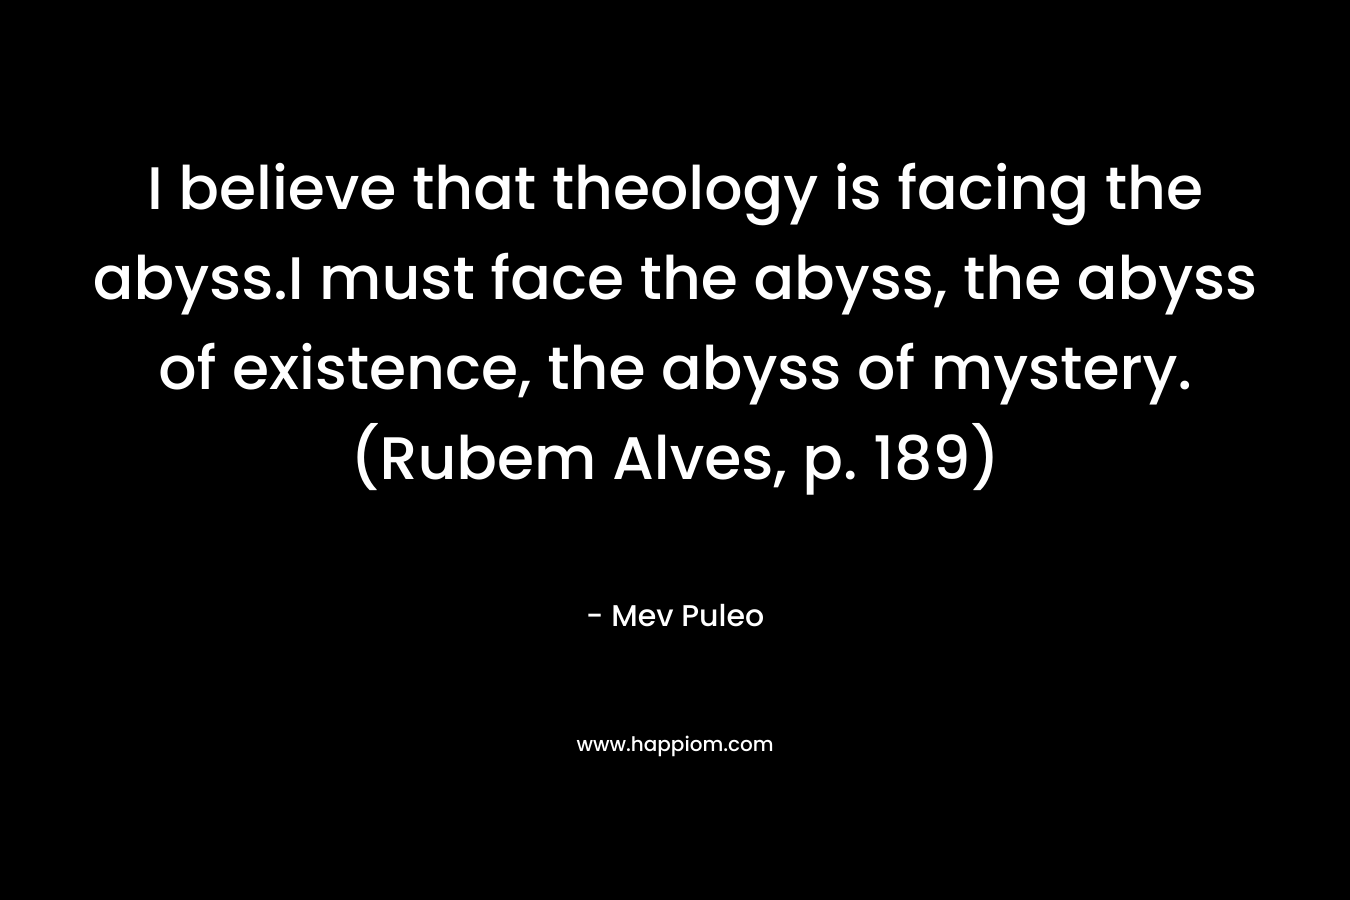 I believe that theology is facing the abyss.I must face the abyss, the abyss of existence, the abyss of mystery. (Rubem Alves, p. 189)